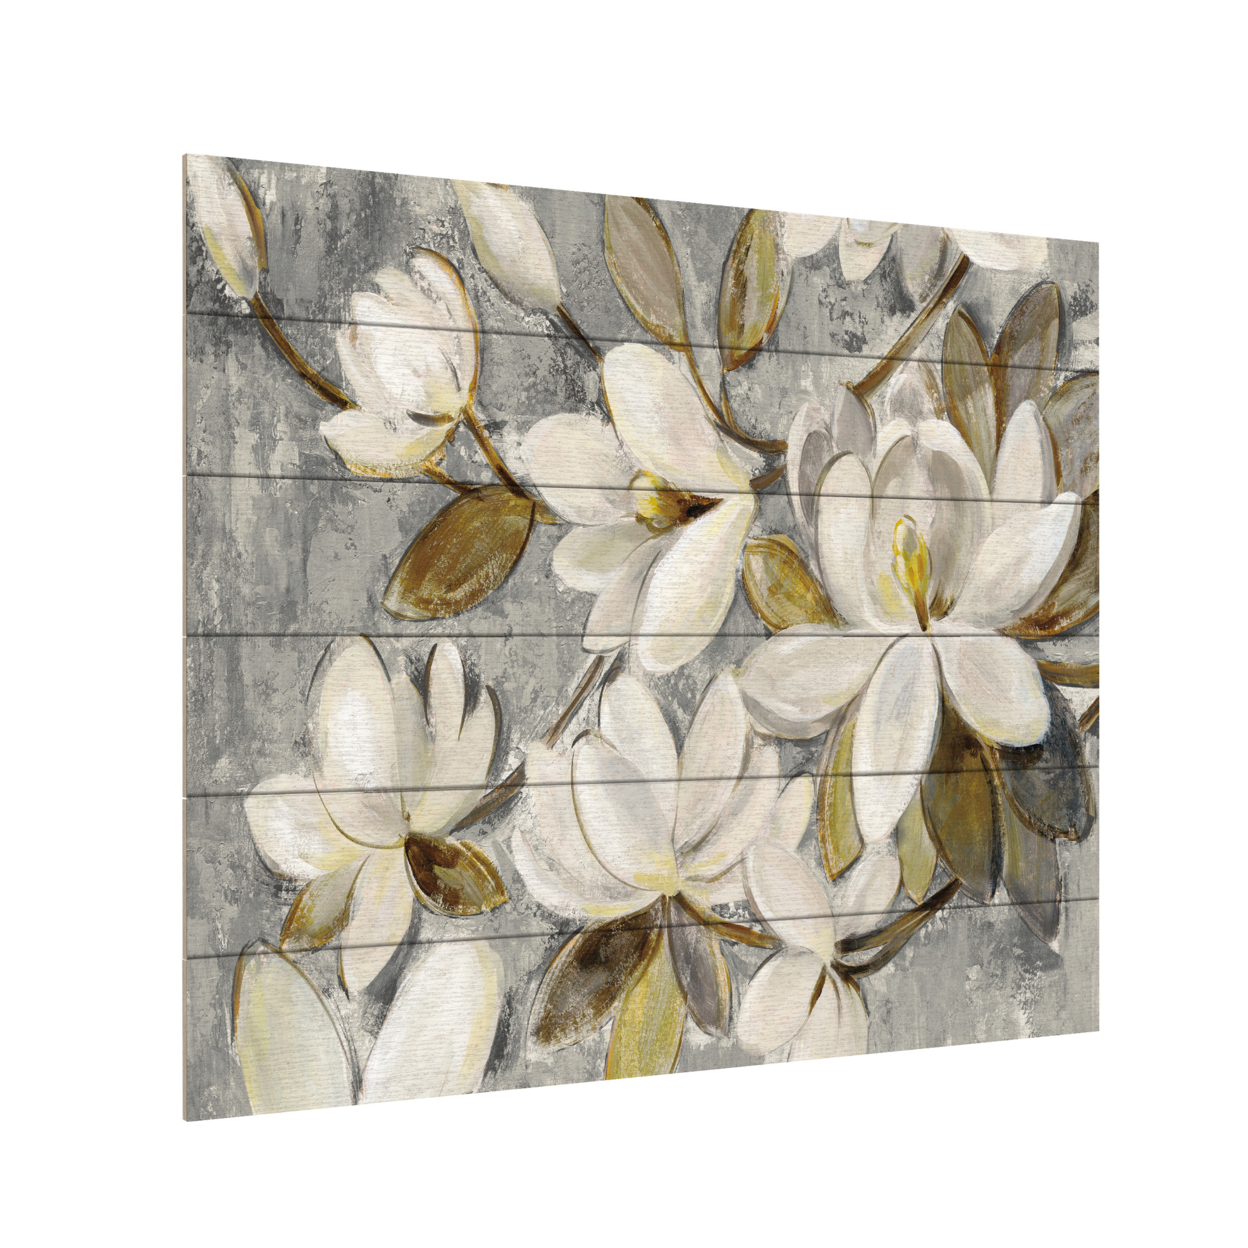 Wooden Slat Art 18 X 22 Inches Titled Magnolia Simplicity Neutral Gray Ready To Hang Home Decor Picture